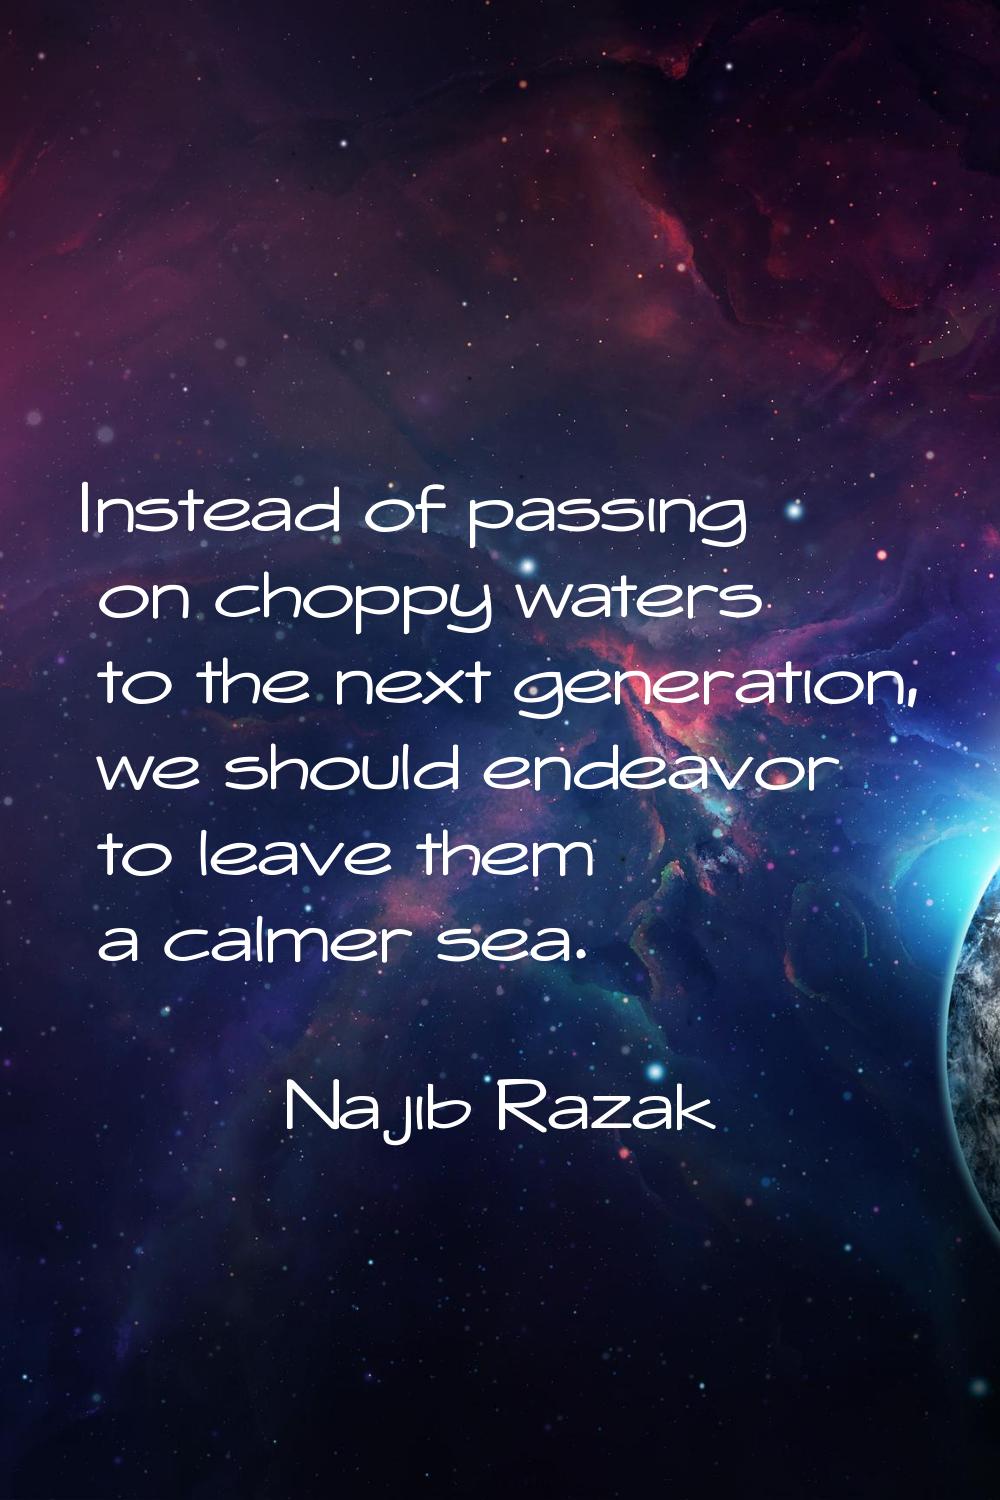 Instead of passing on choppy waters to the next generation, we should endeavor to leave them a calm